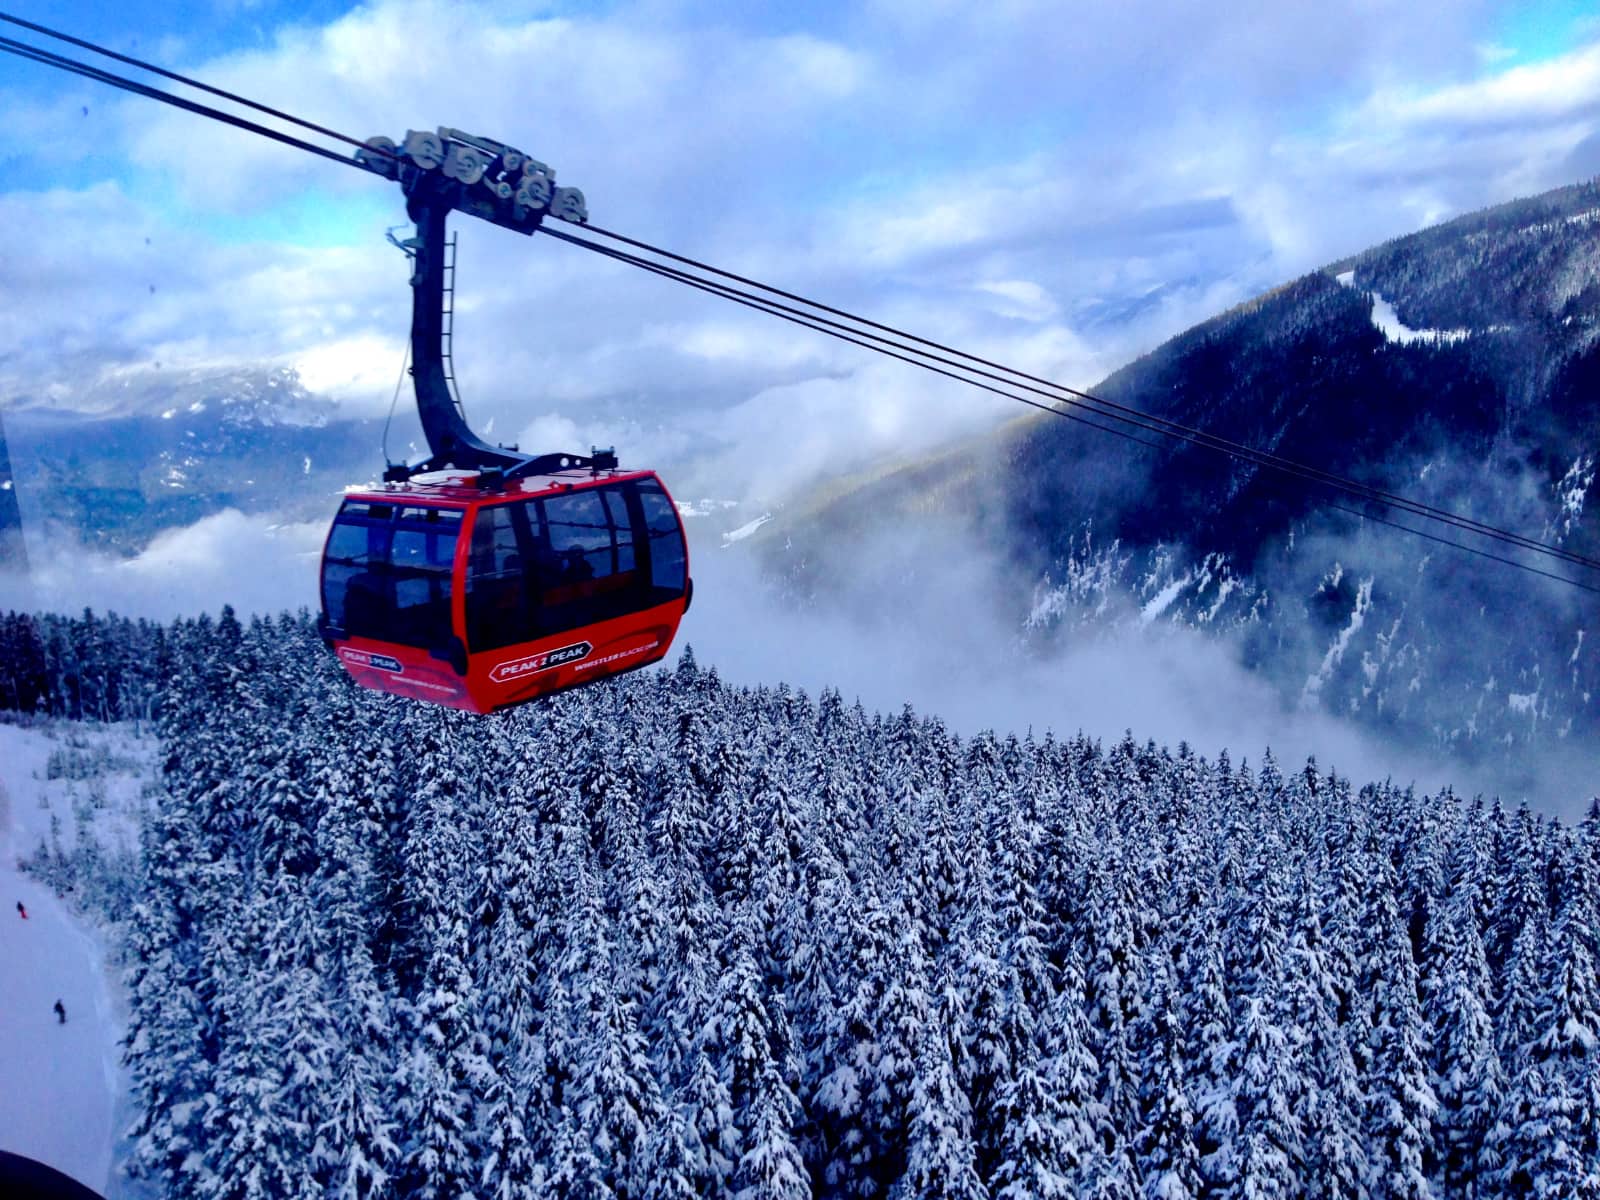 Red cable car heading to summit of mountain